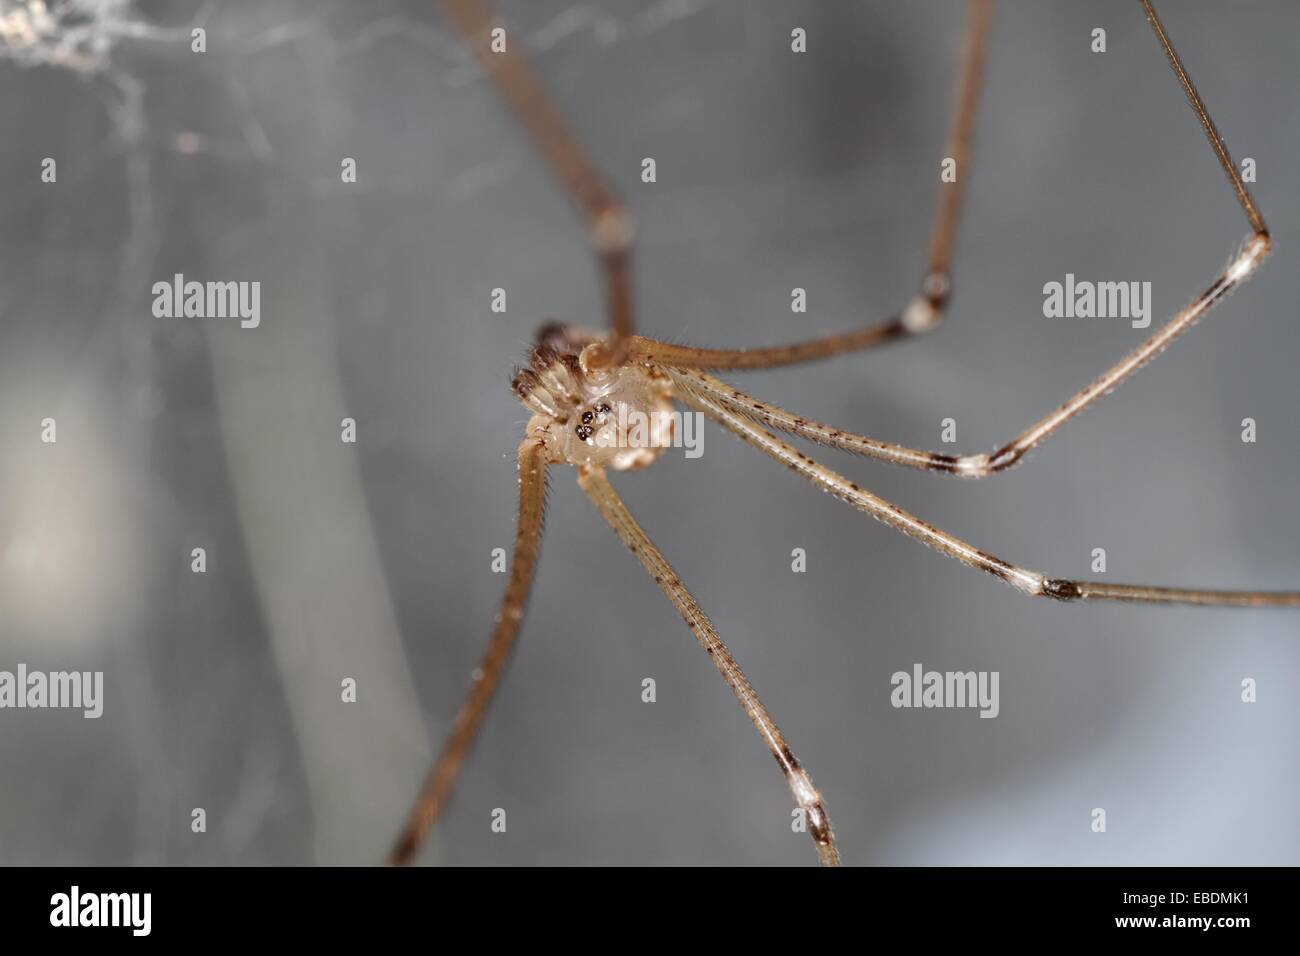 Pholcus phalangioides spider, Spagna. Foto Stock